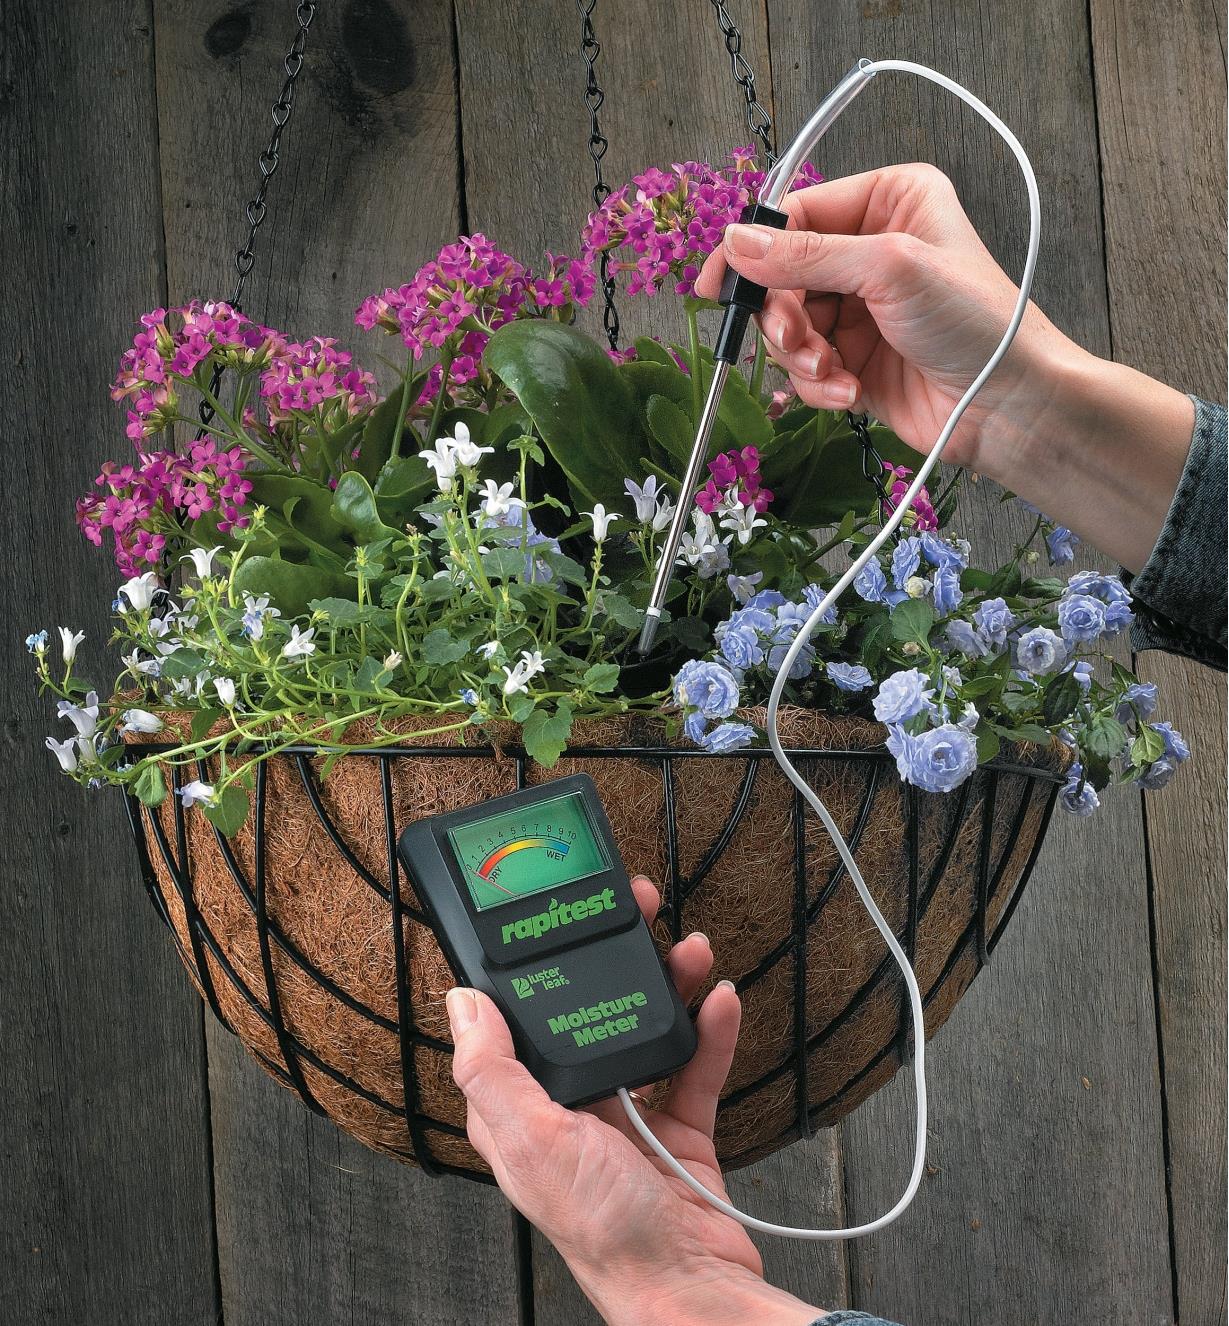 Inserting the probe of the moisture meter into a hanging basket planted with flowers